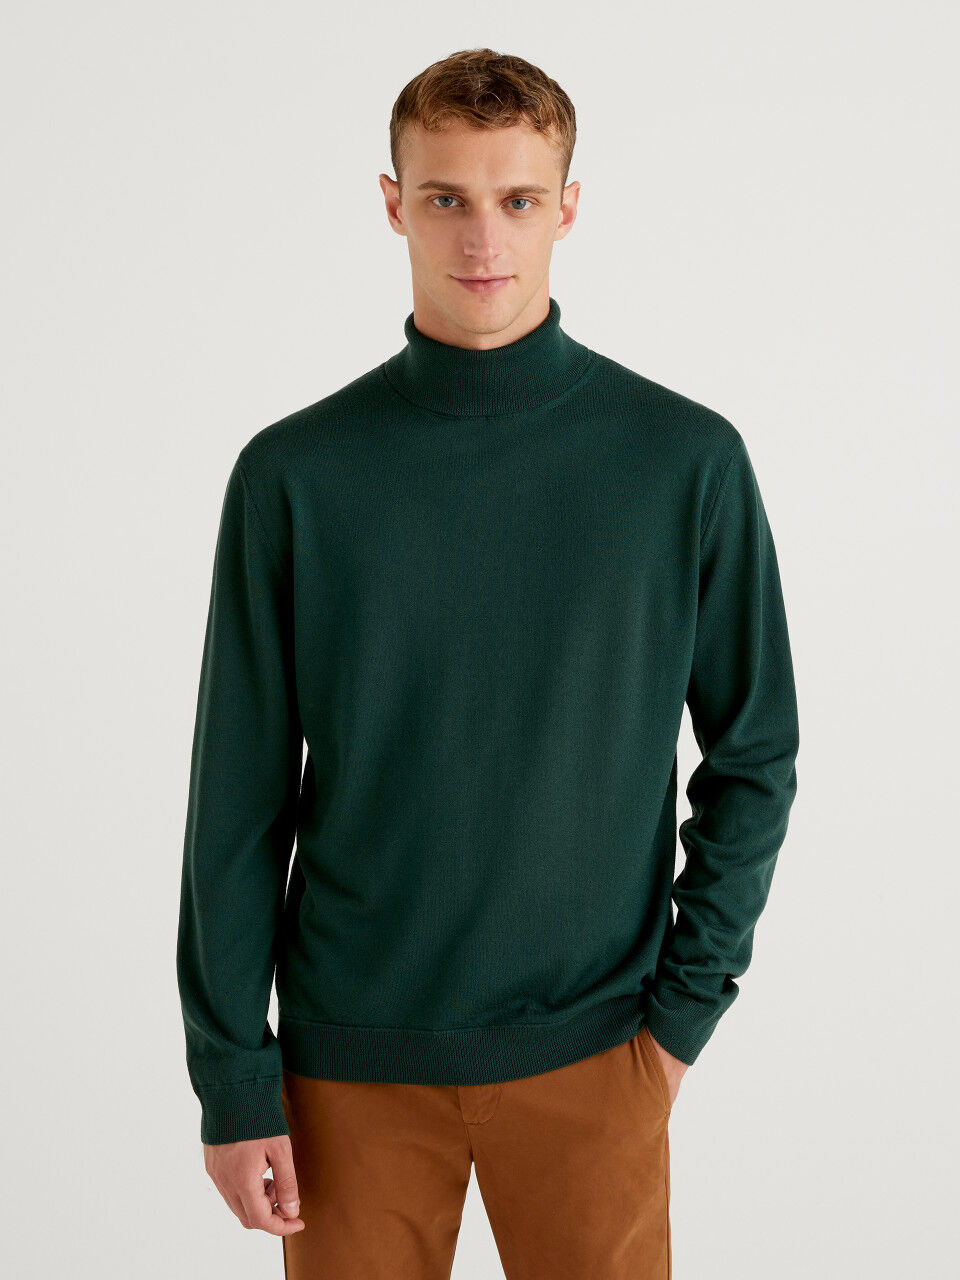 Men's High Neck Sweaters New Collection 2022 | Benetton